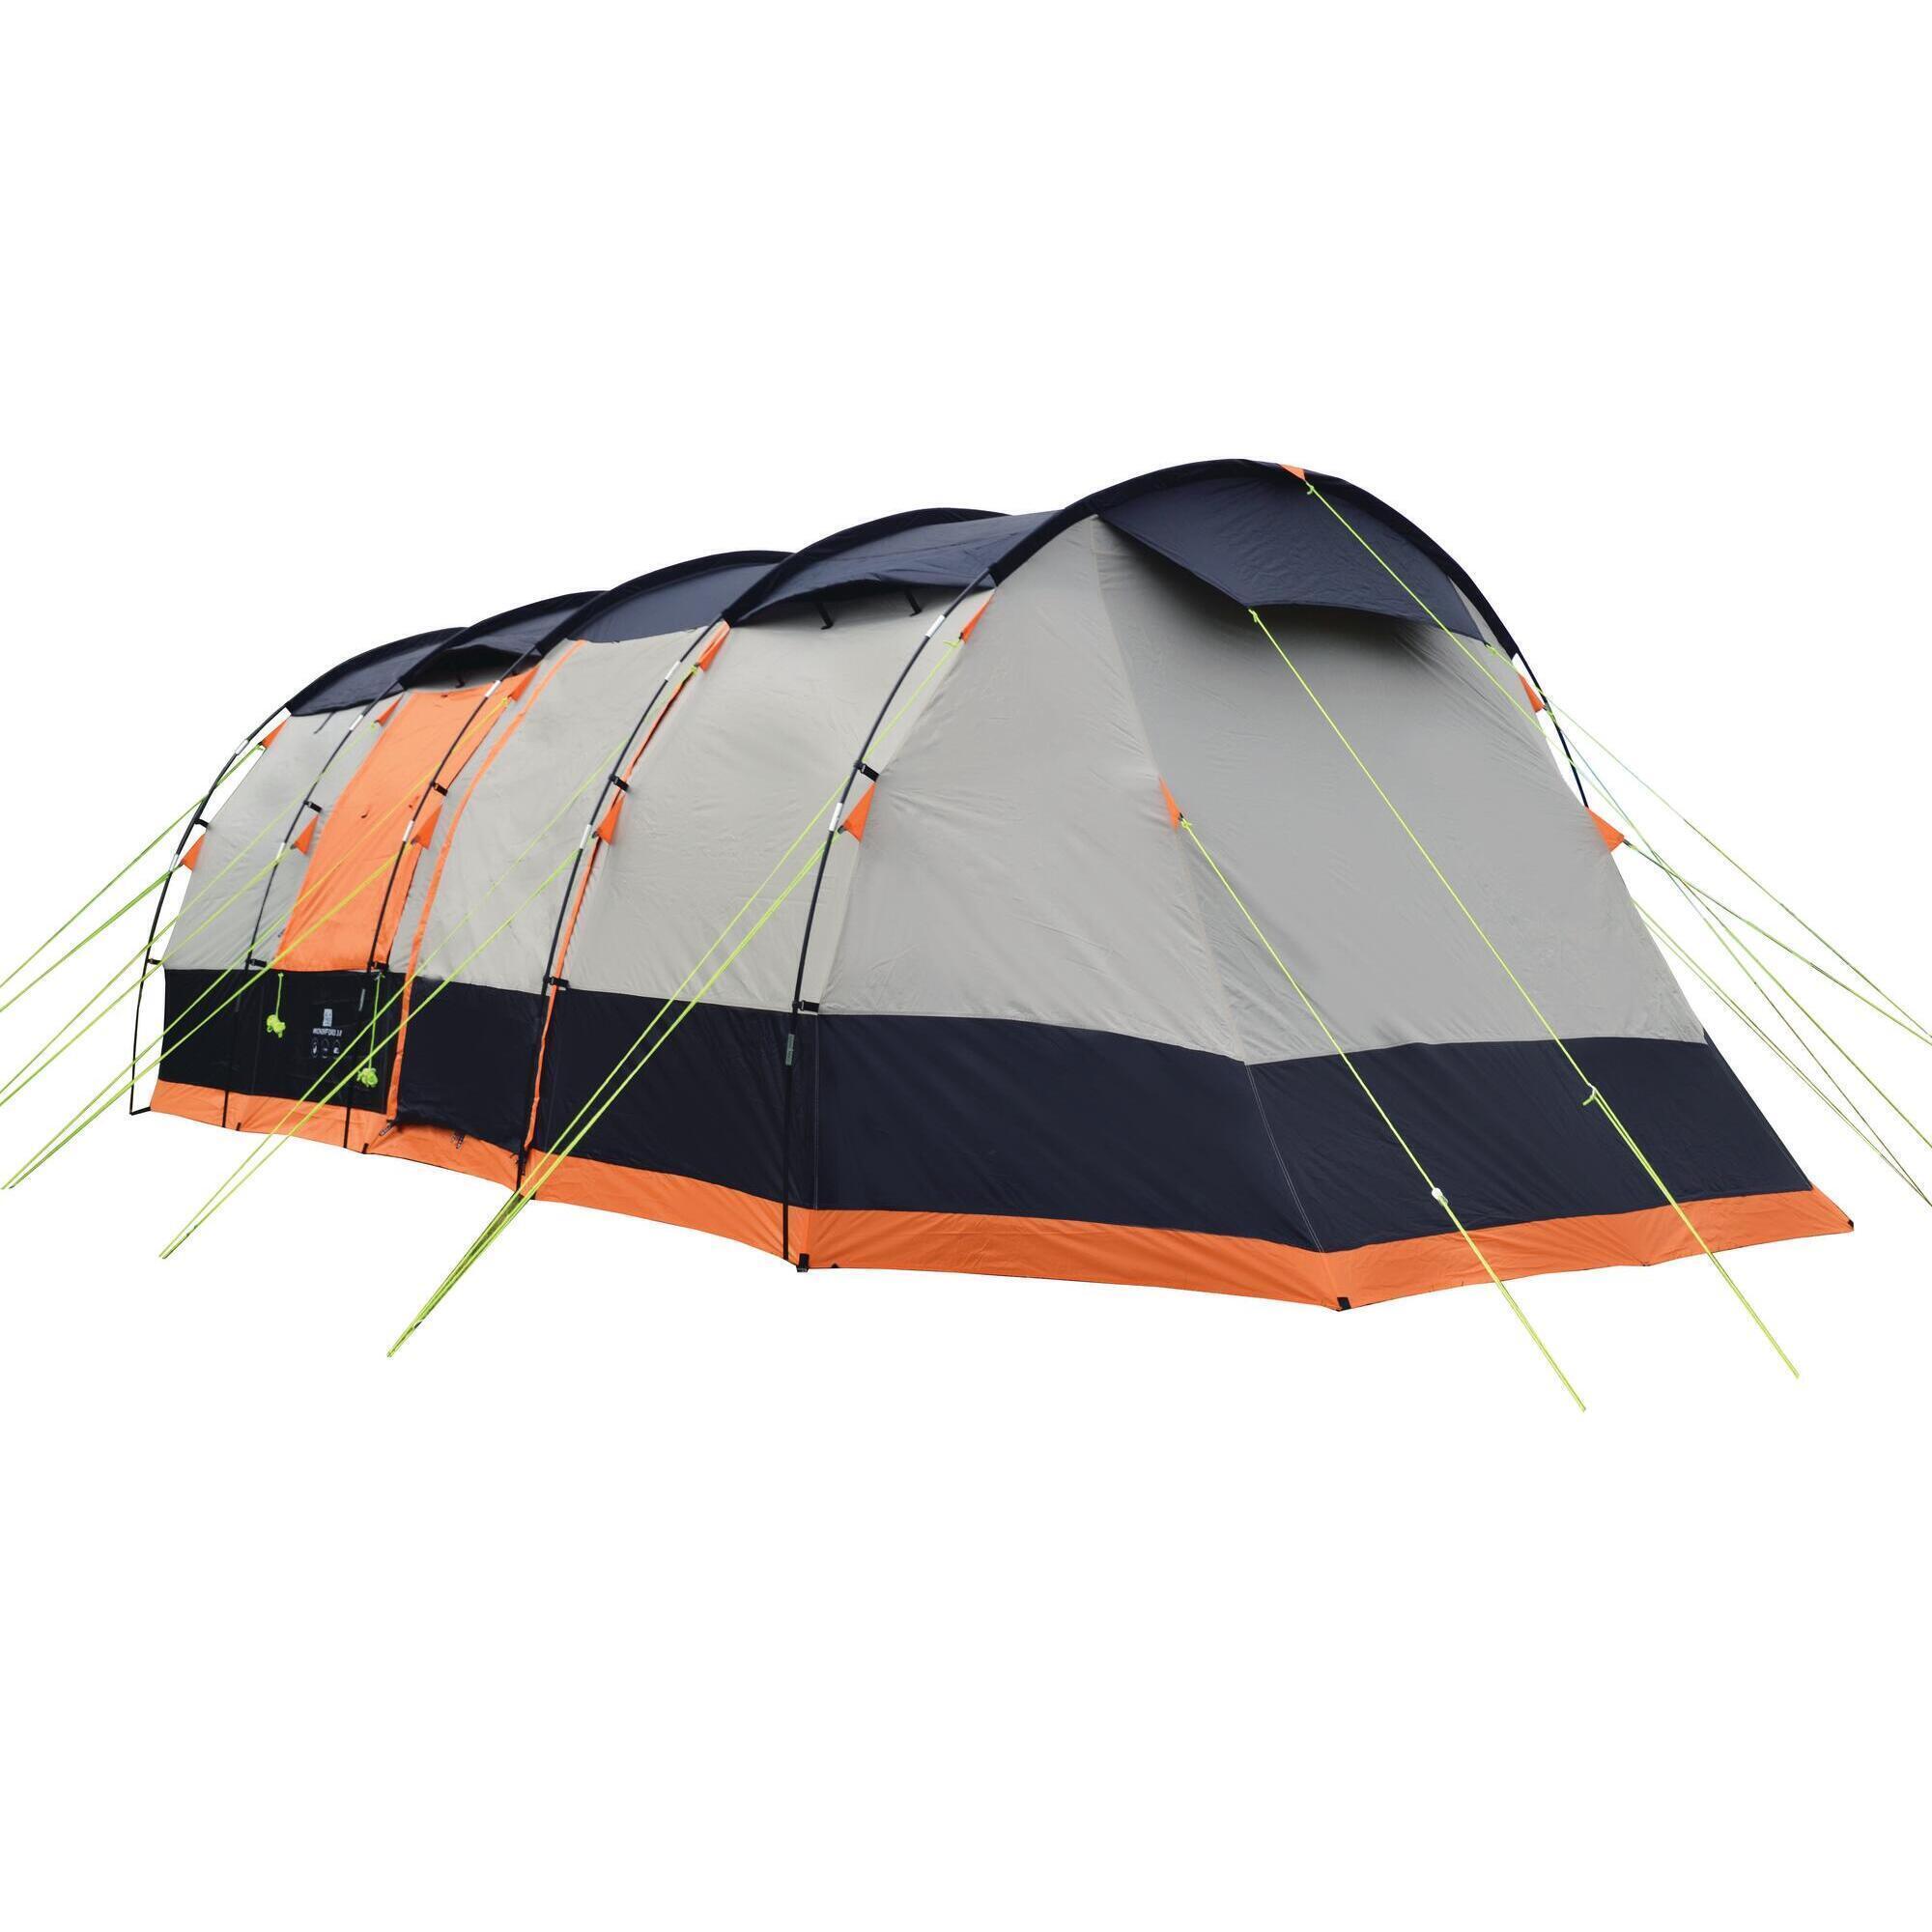 OLPRO OLPRO Wichenford 3.0 8 Berth Tent